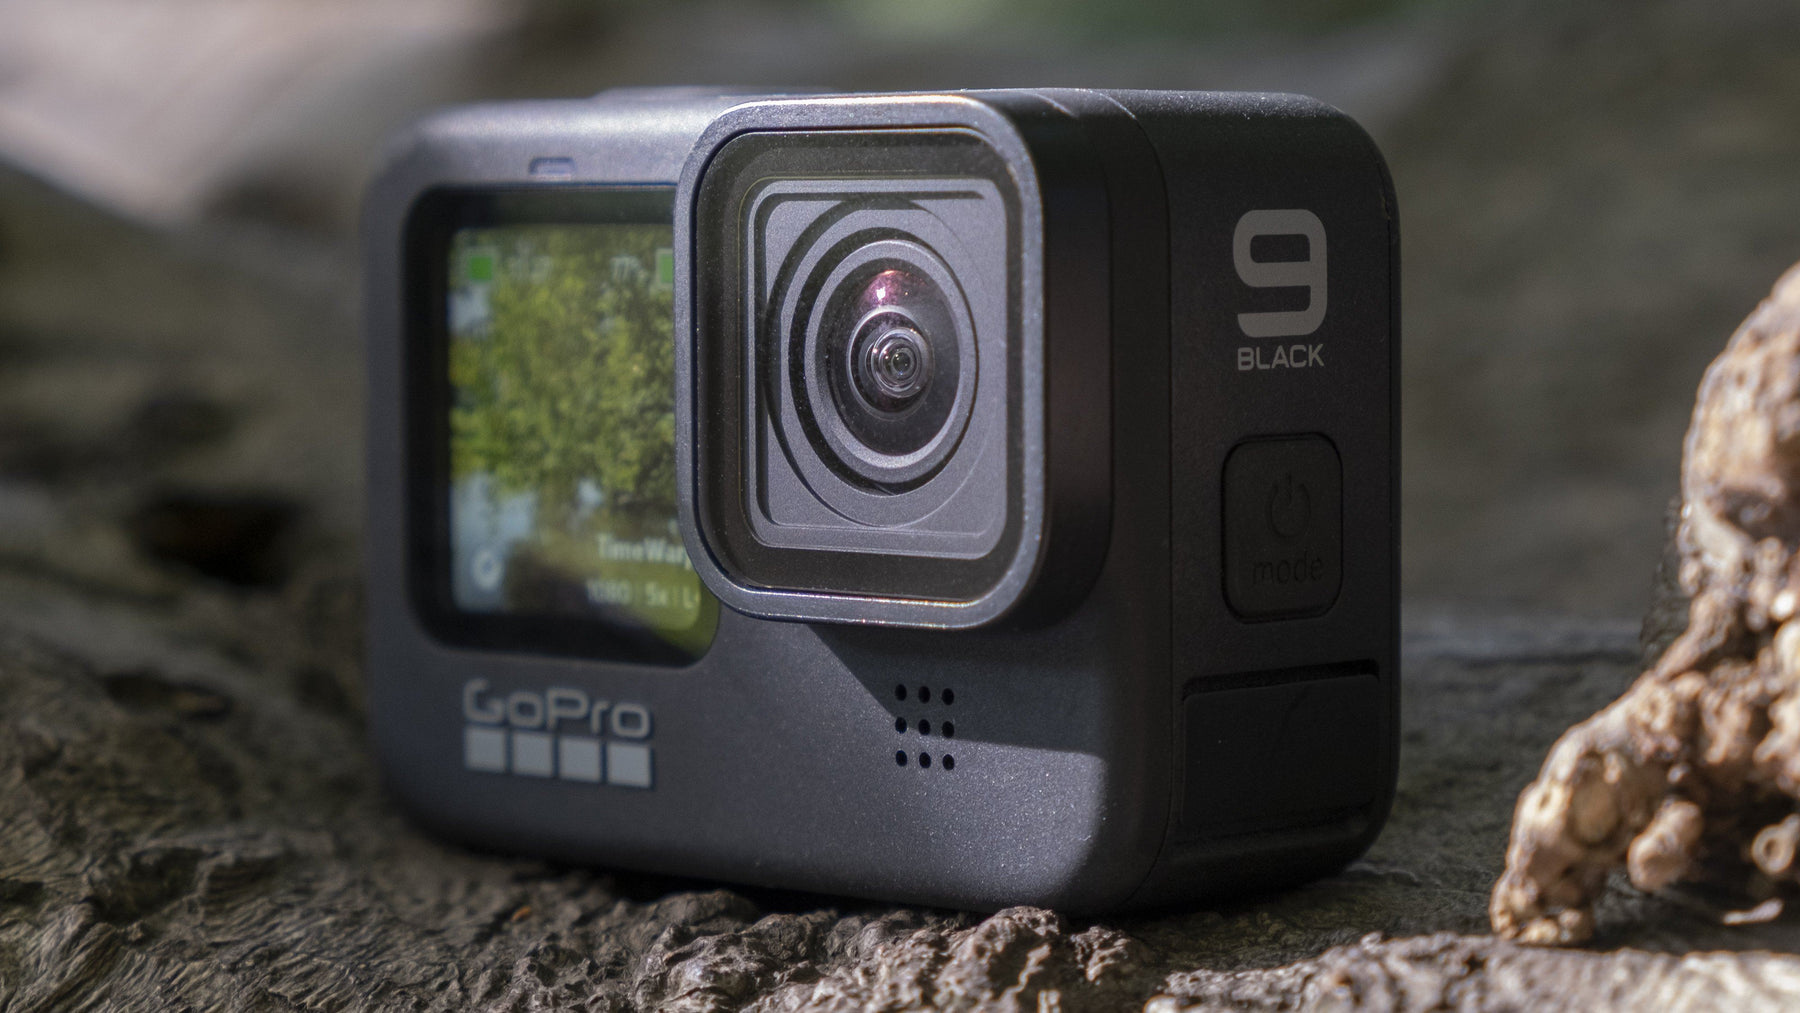 GoPro Hero 9 Black hands-on: All the tools to tell your story